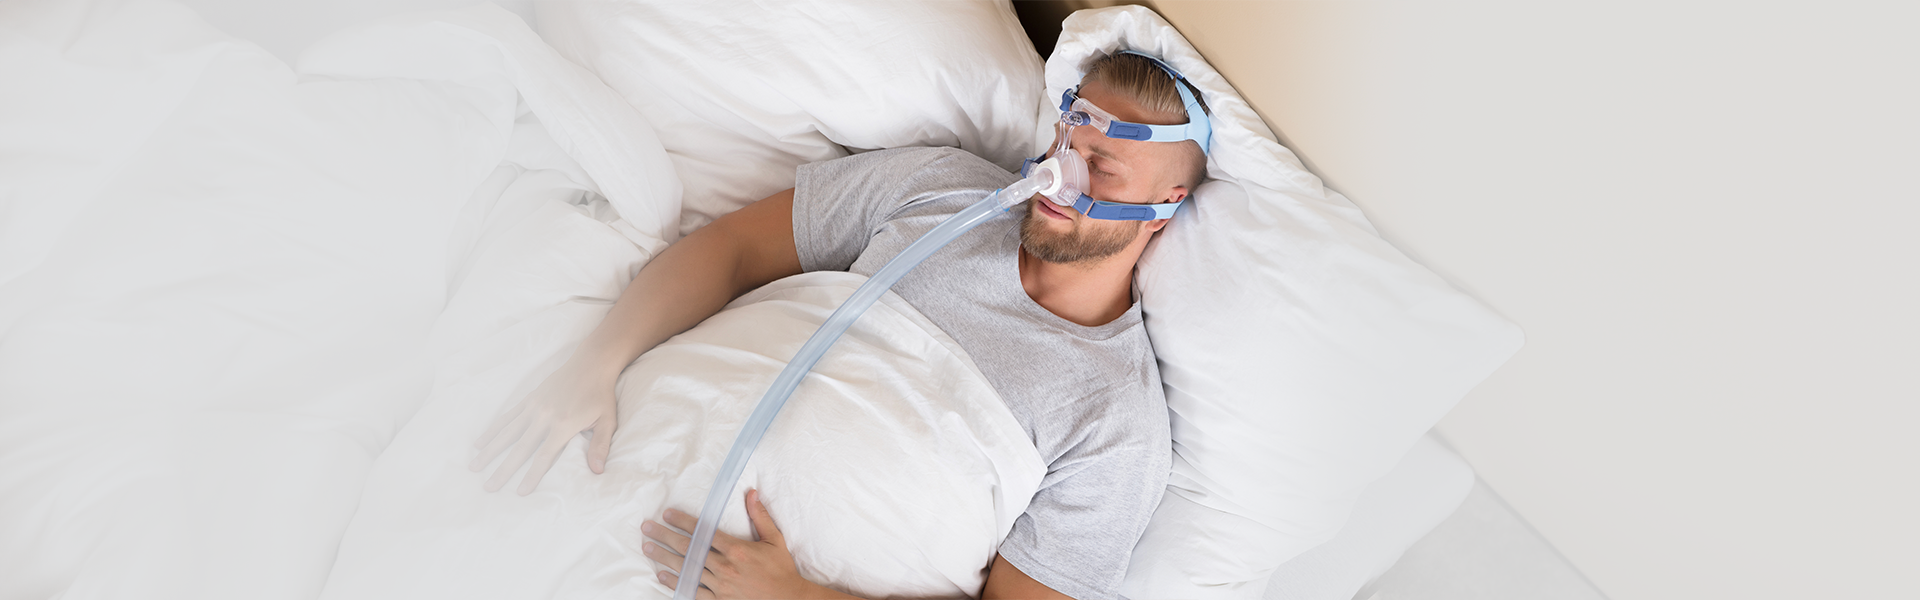 Can Sleep Apnea Be Cured or Only Managed?